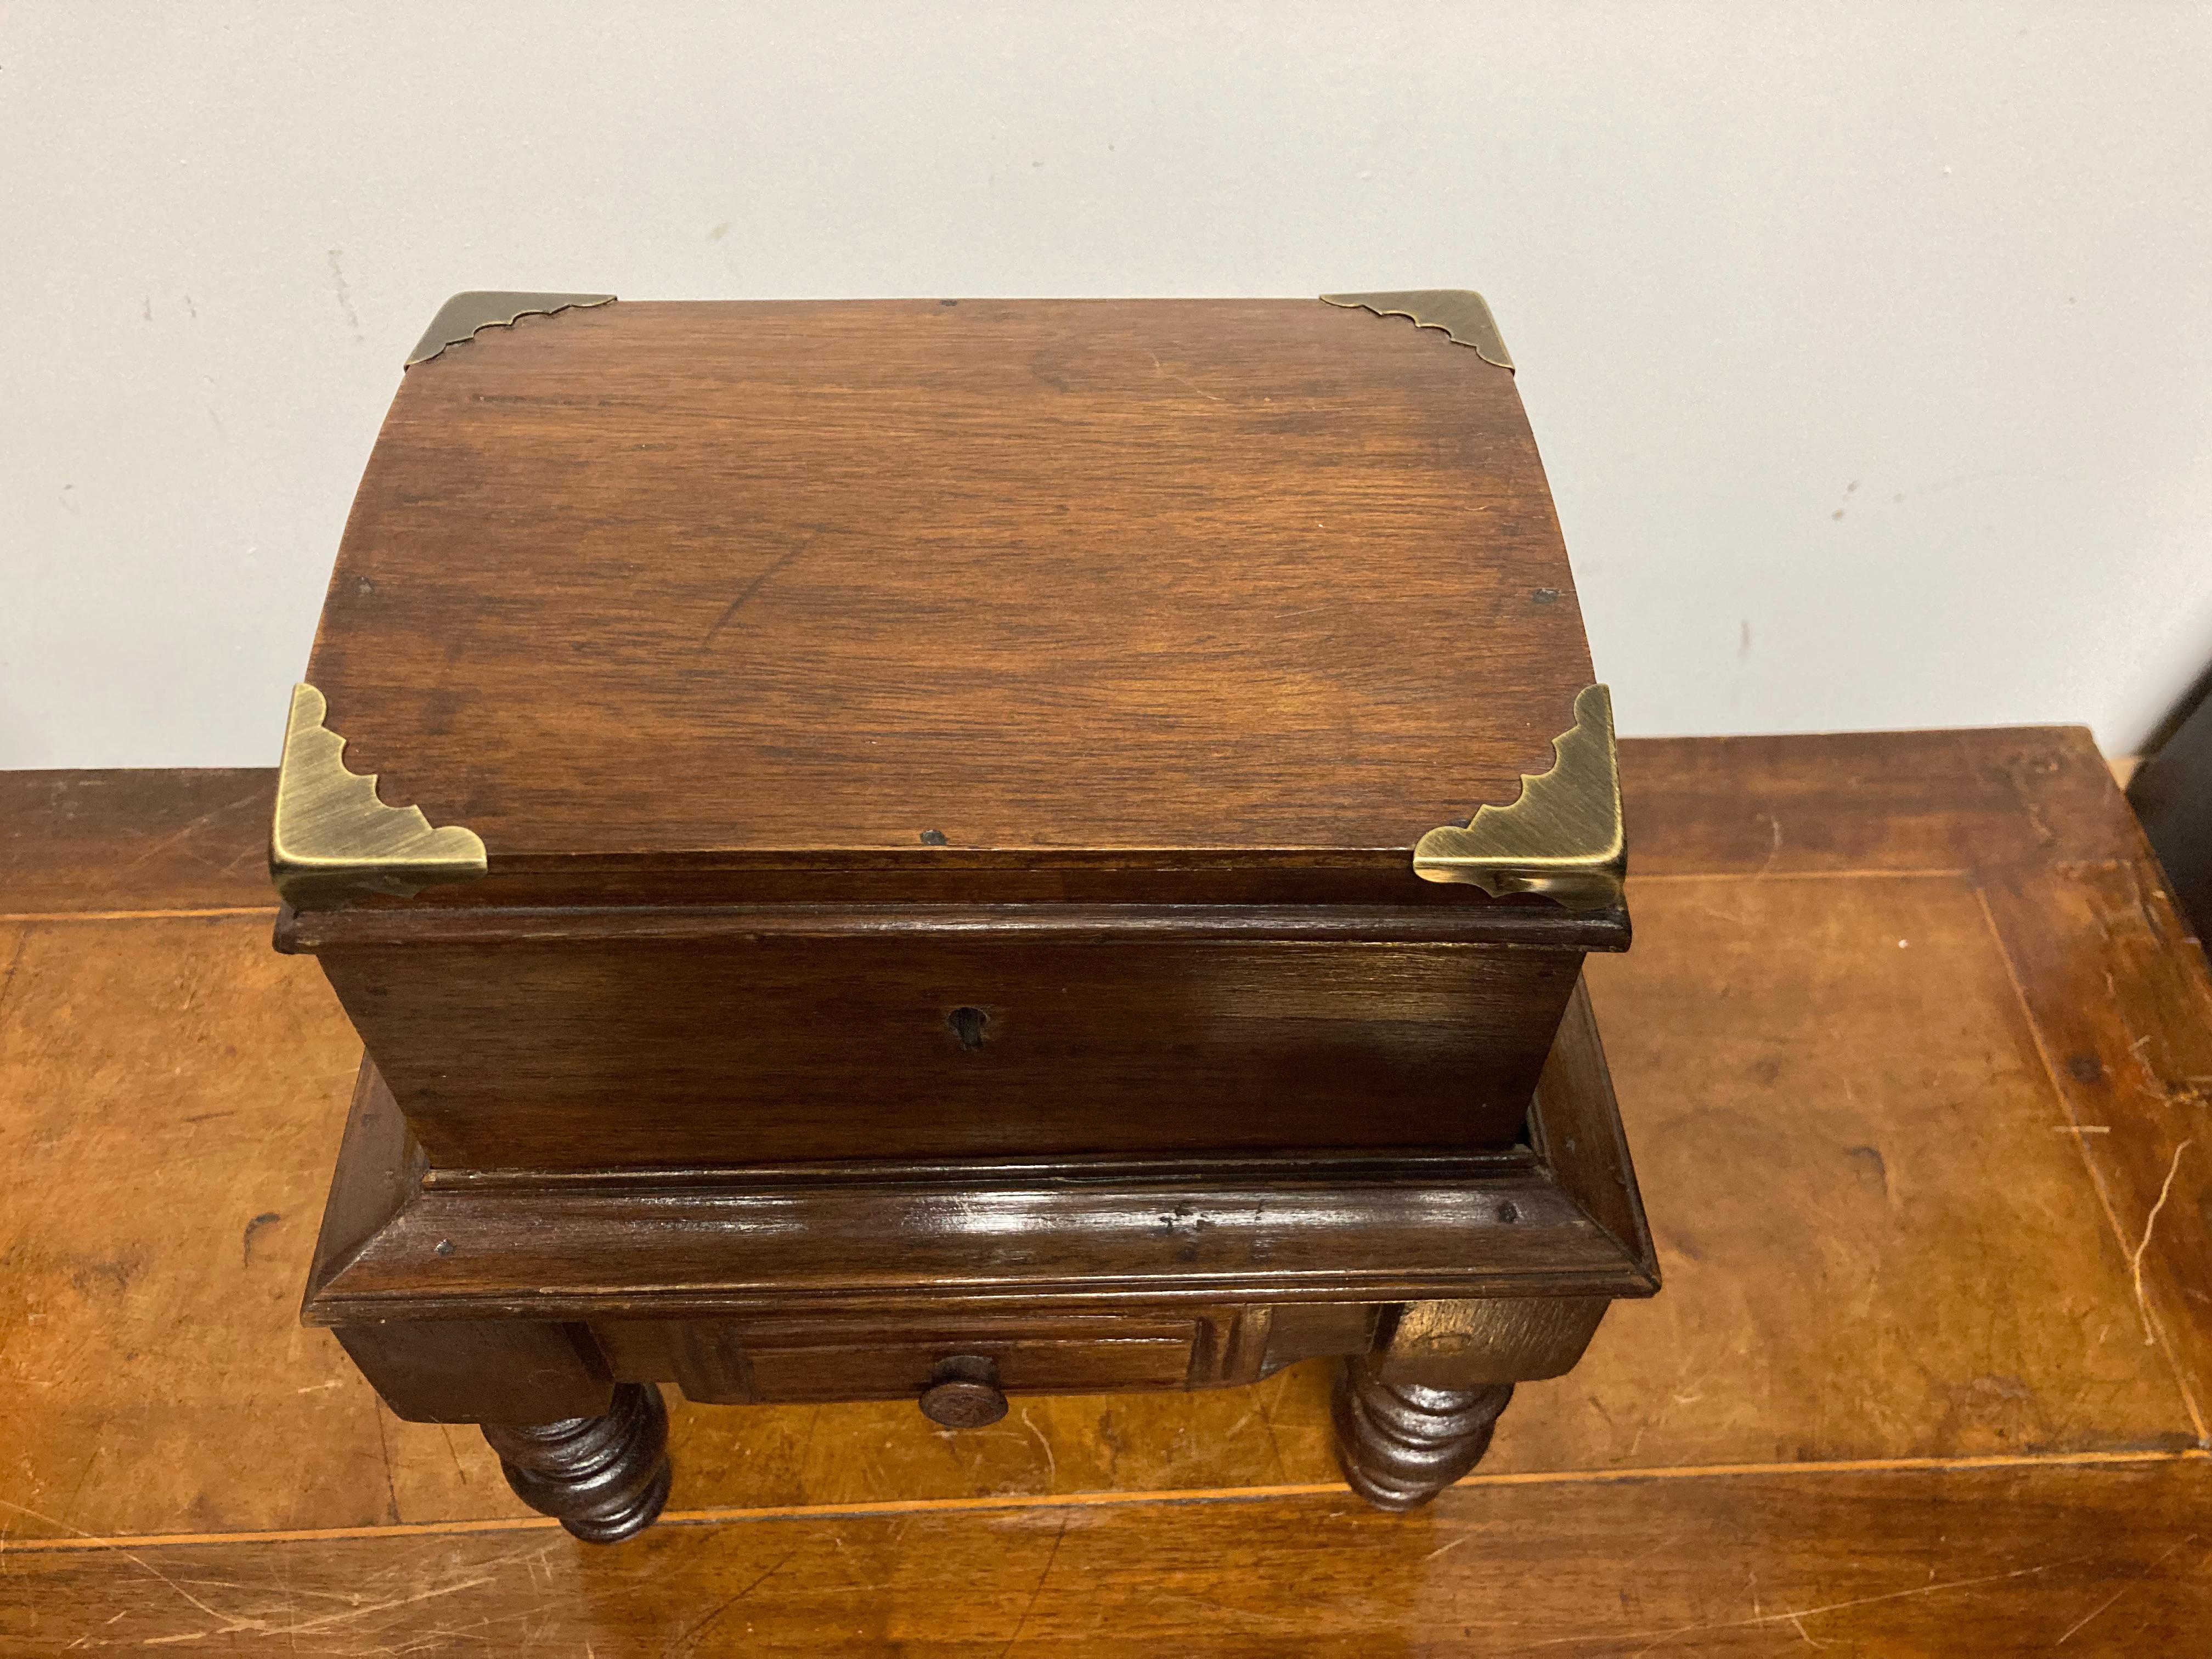 Edwardian English Mahogany Box on Stand, Early 20th Century For Sale